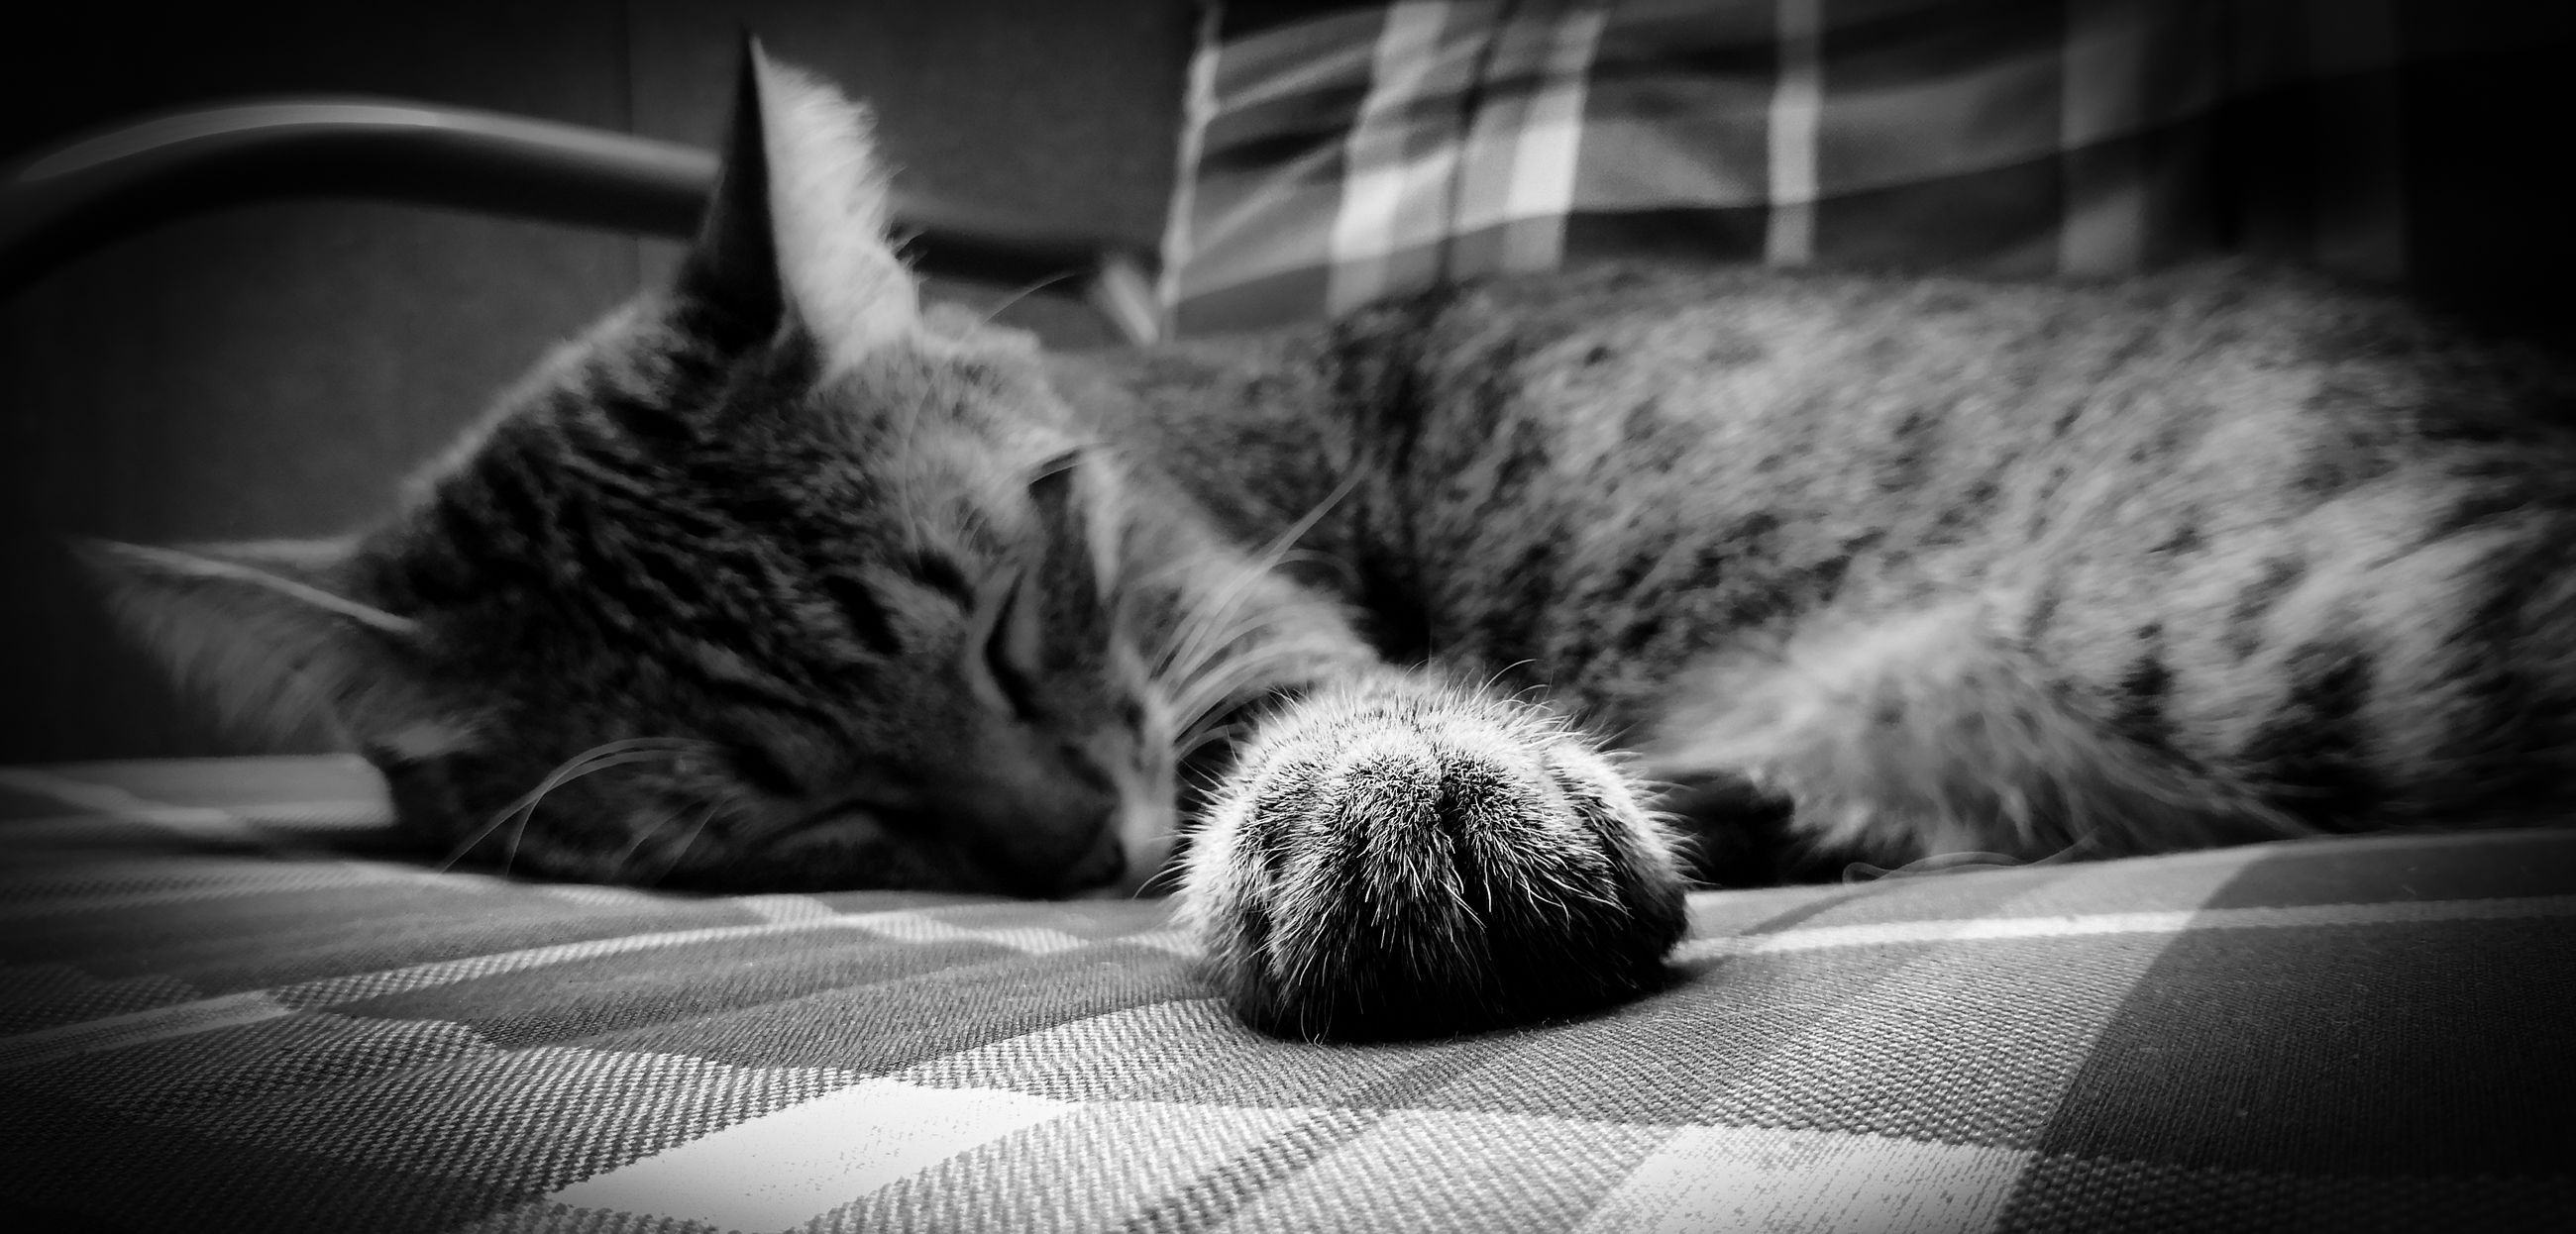 CLOSE-UP OF A CAT SLEEPING ON BED